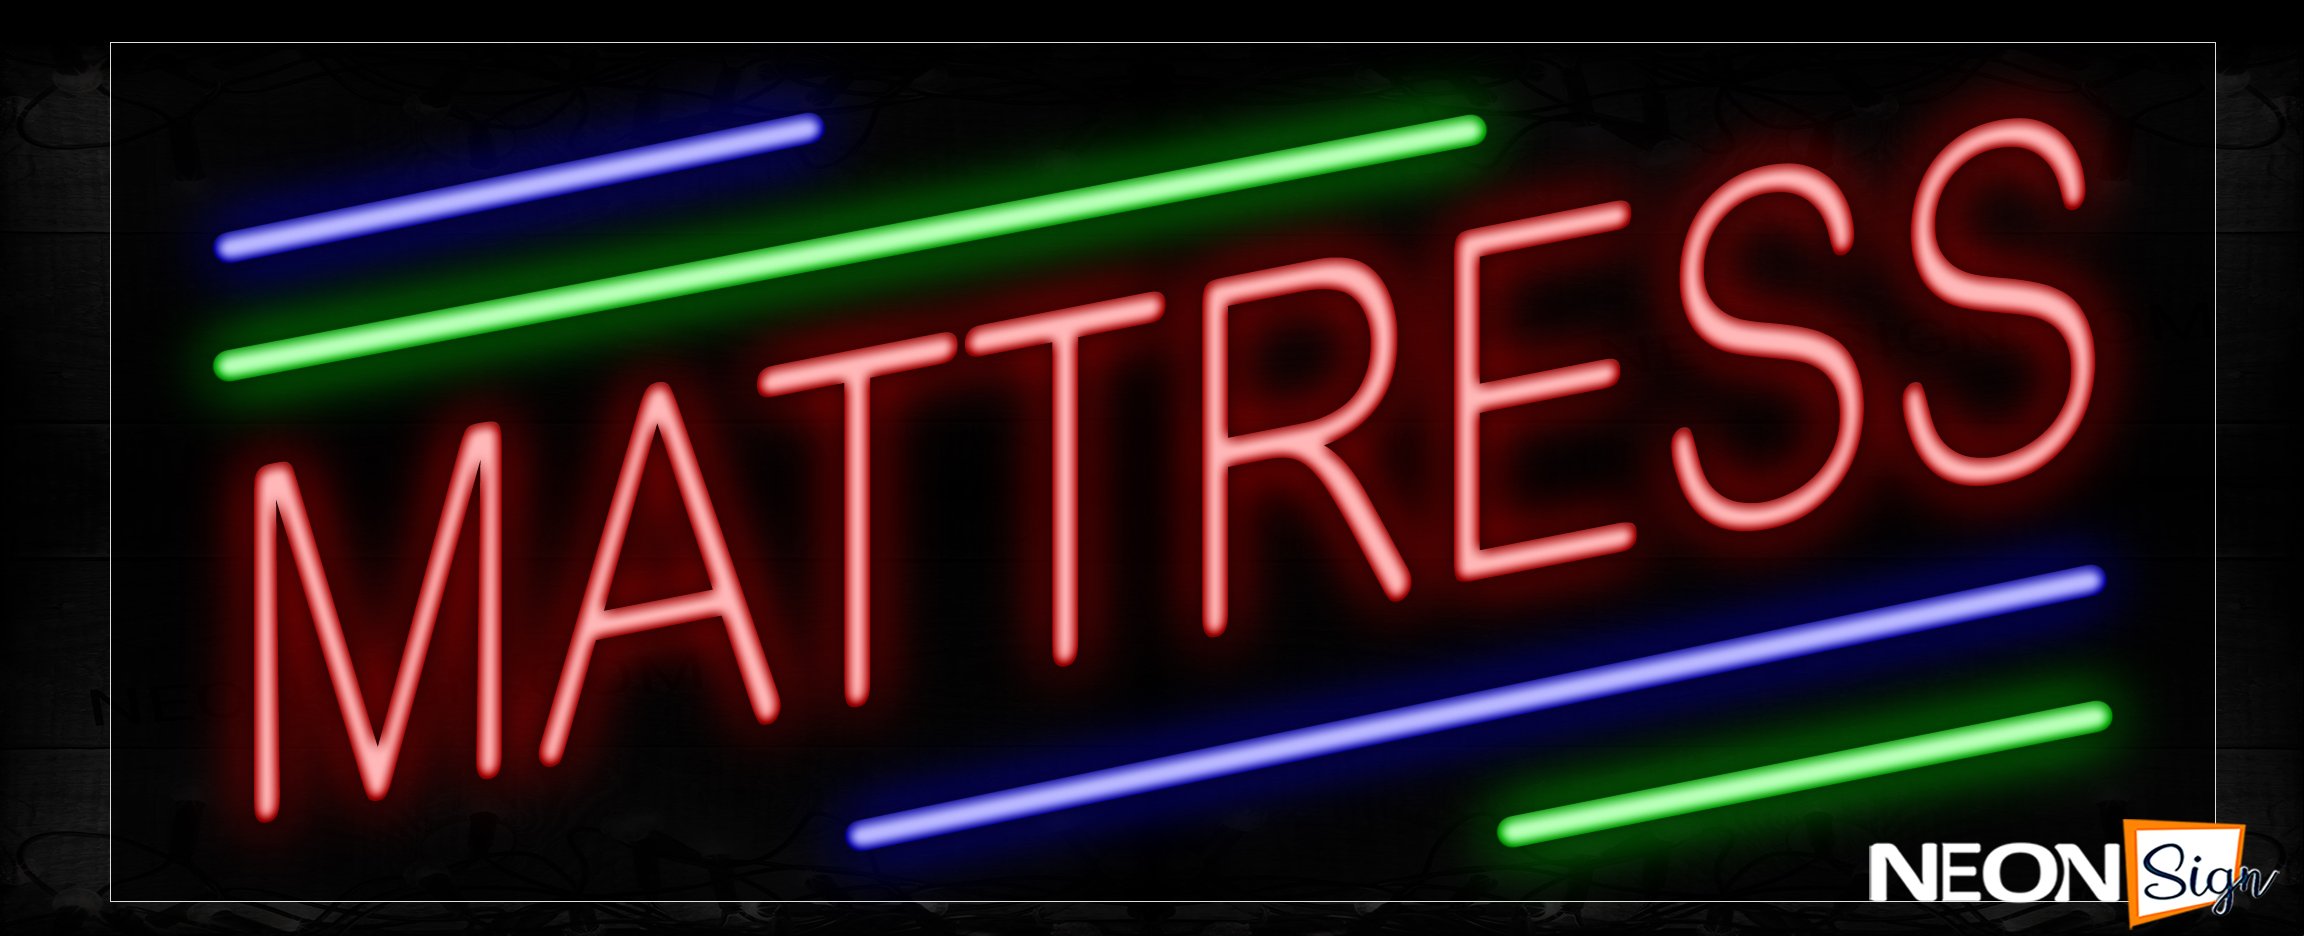 Image of 10833 Mattress With Green And Blue Lines Neon Signs_13x32 Black Backing